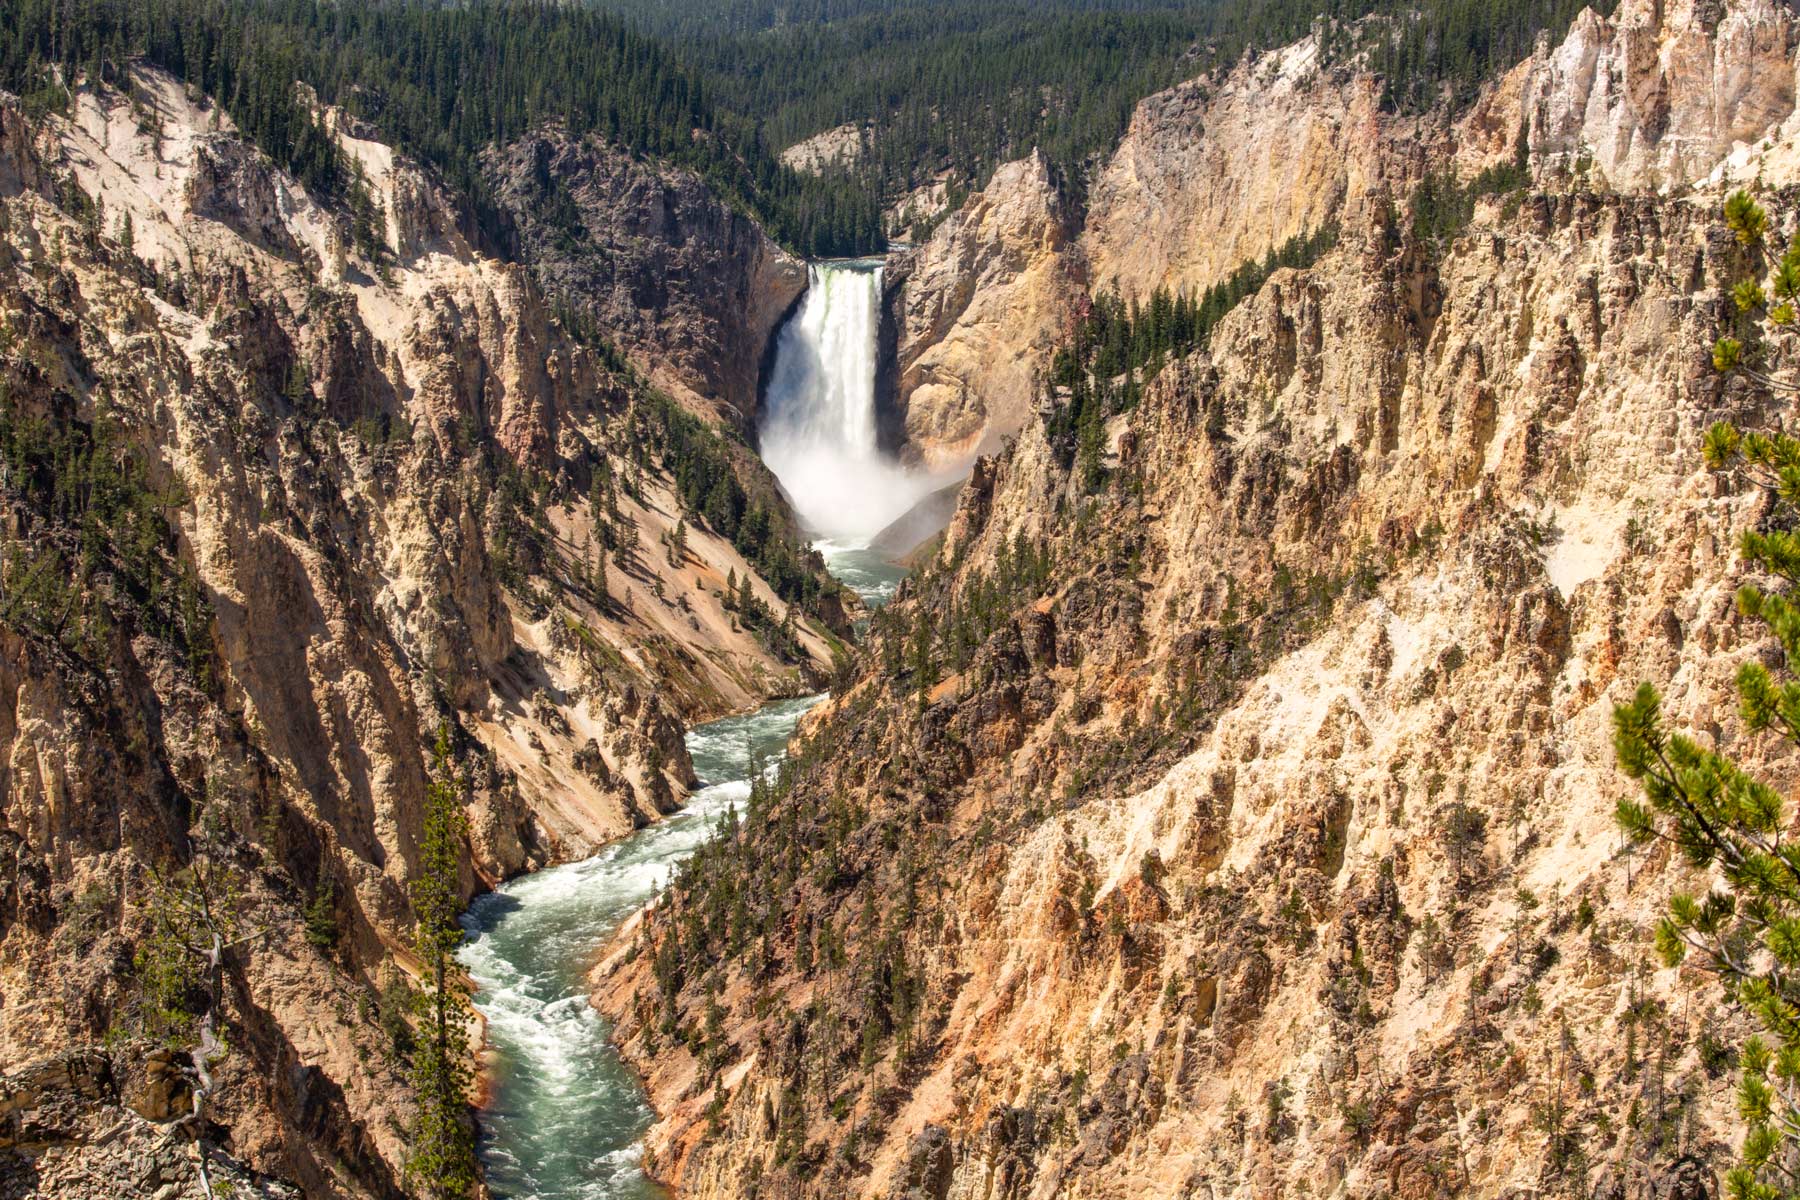 yellowstone national park, most visited national parks